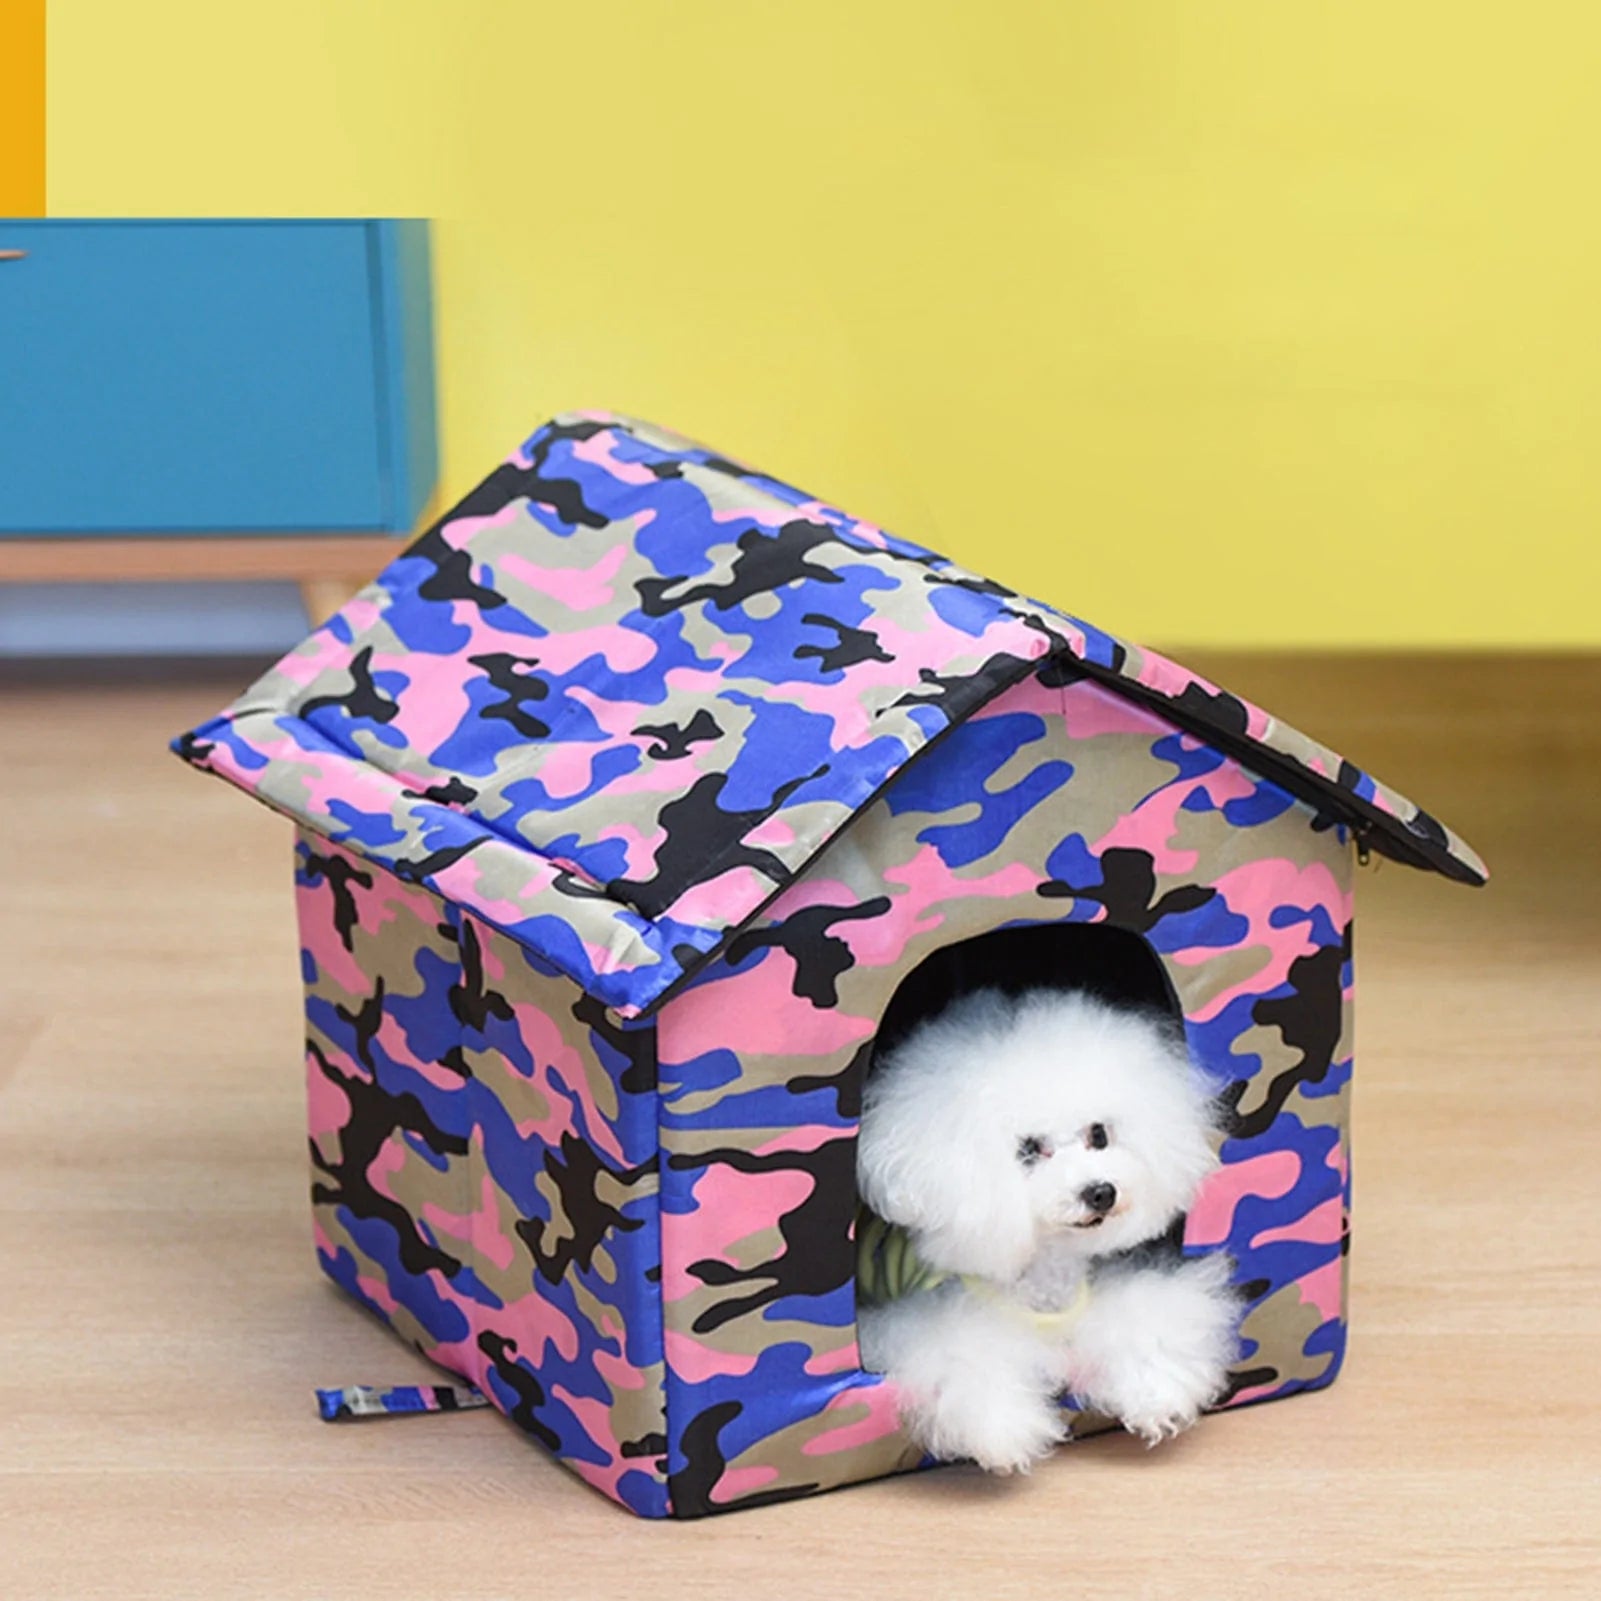 Ybeauty Pet House Exquisite Large Space Comfortable Portable Warm Cat Thickened Nest Dog House for Home Use